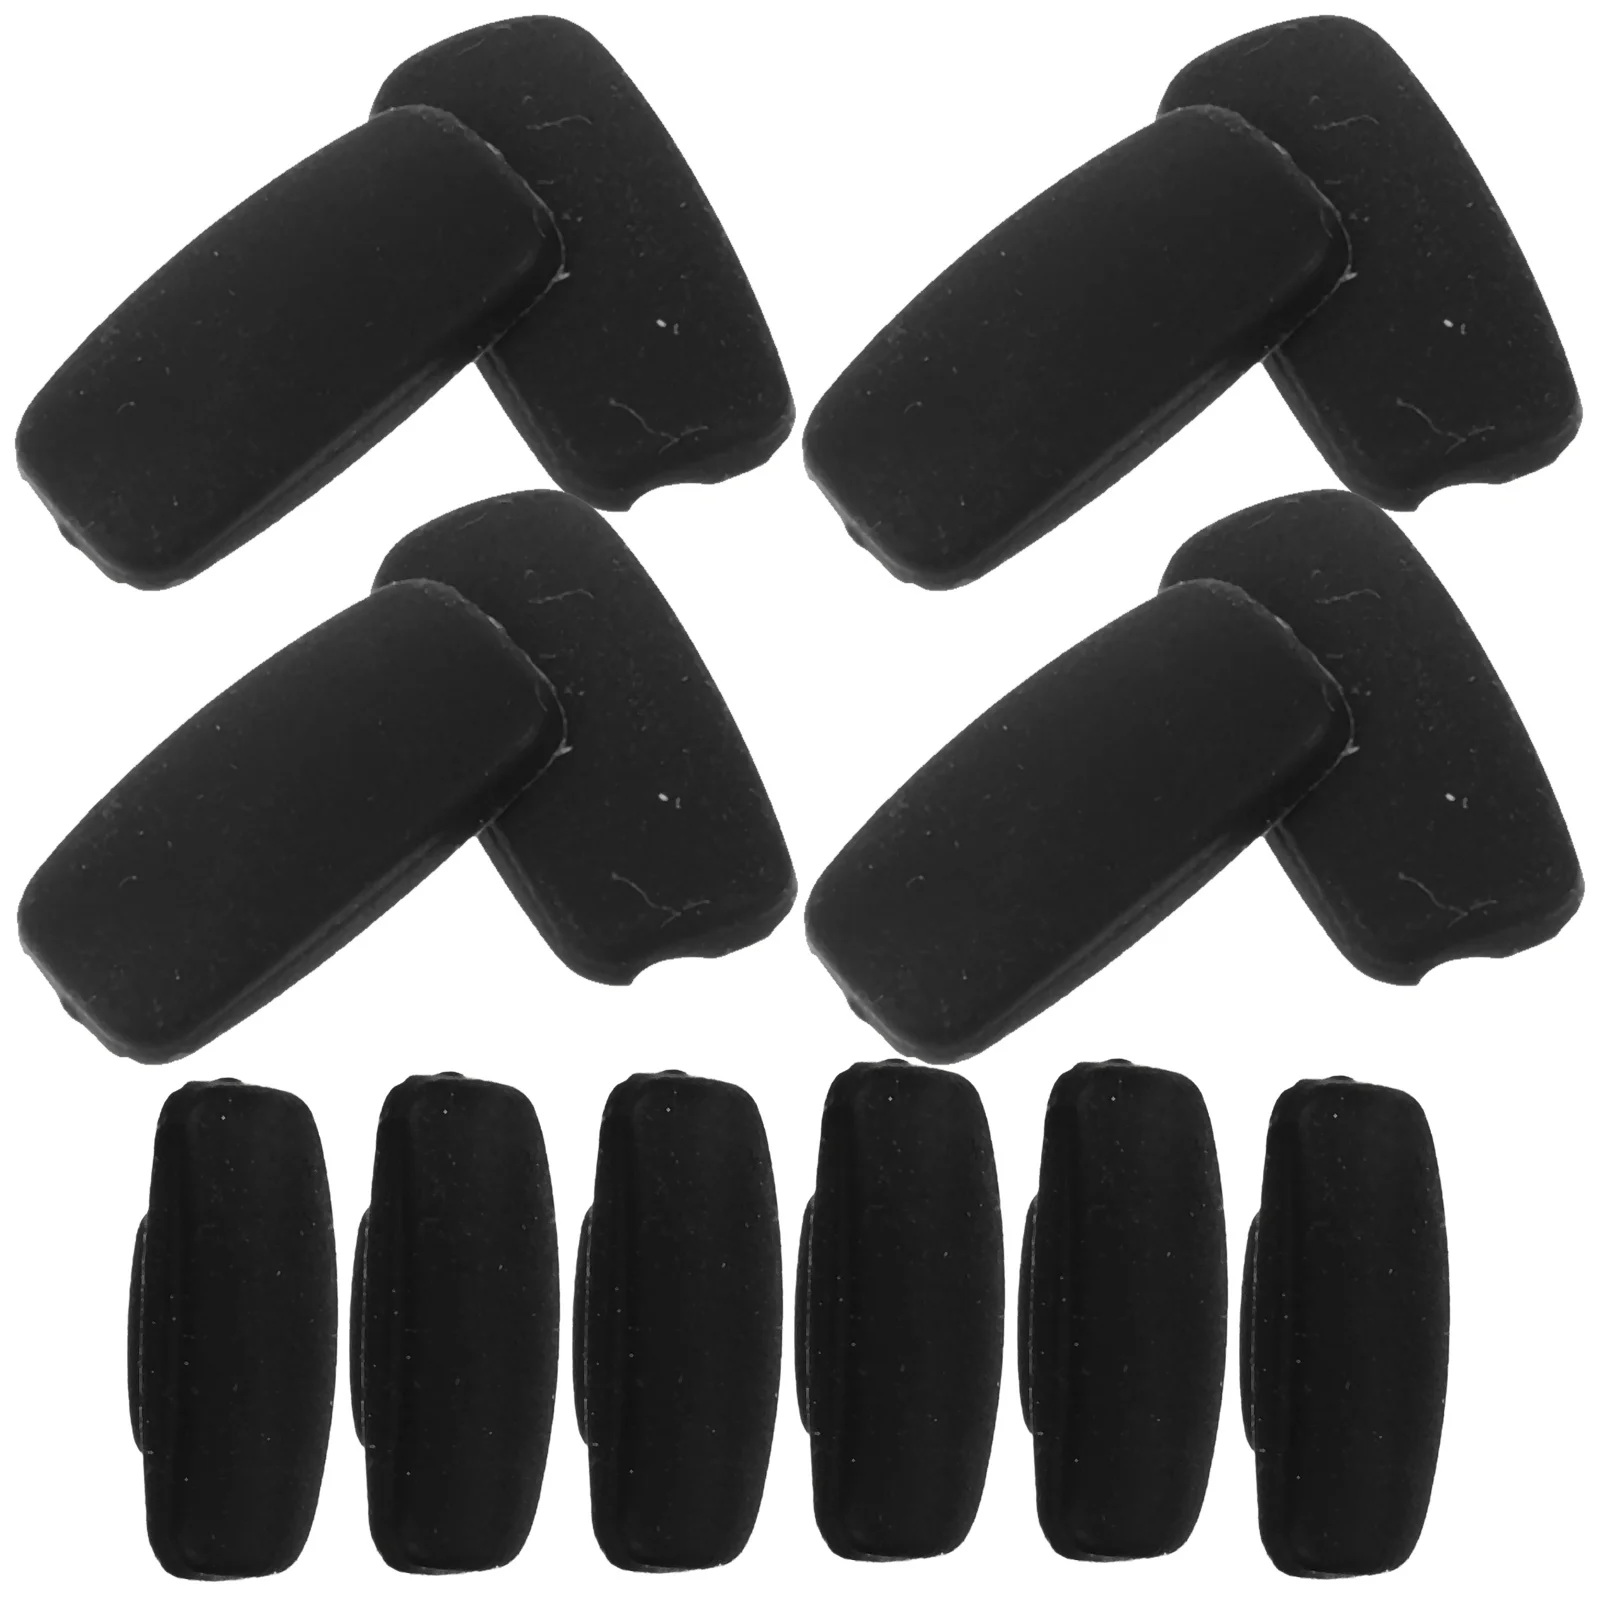 

10 Pairs Nose Guards Glasses Eye Pads Eyeglass Parts Silicone Grips Bridge Sunglasses